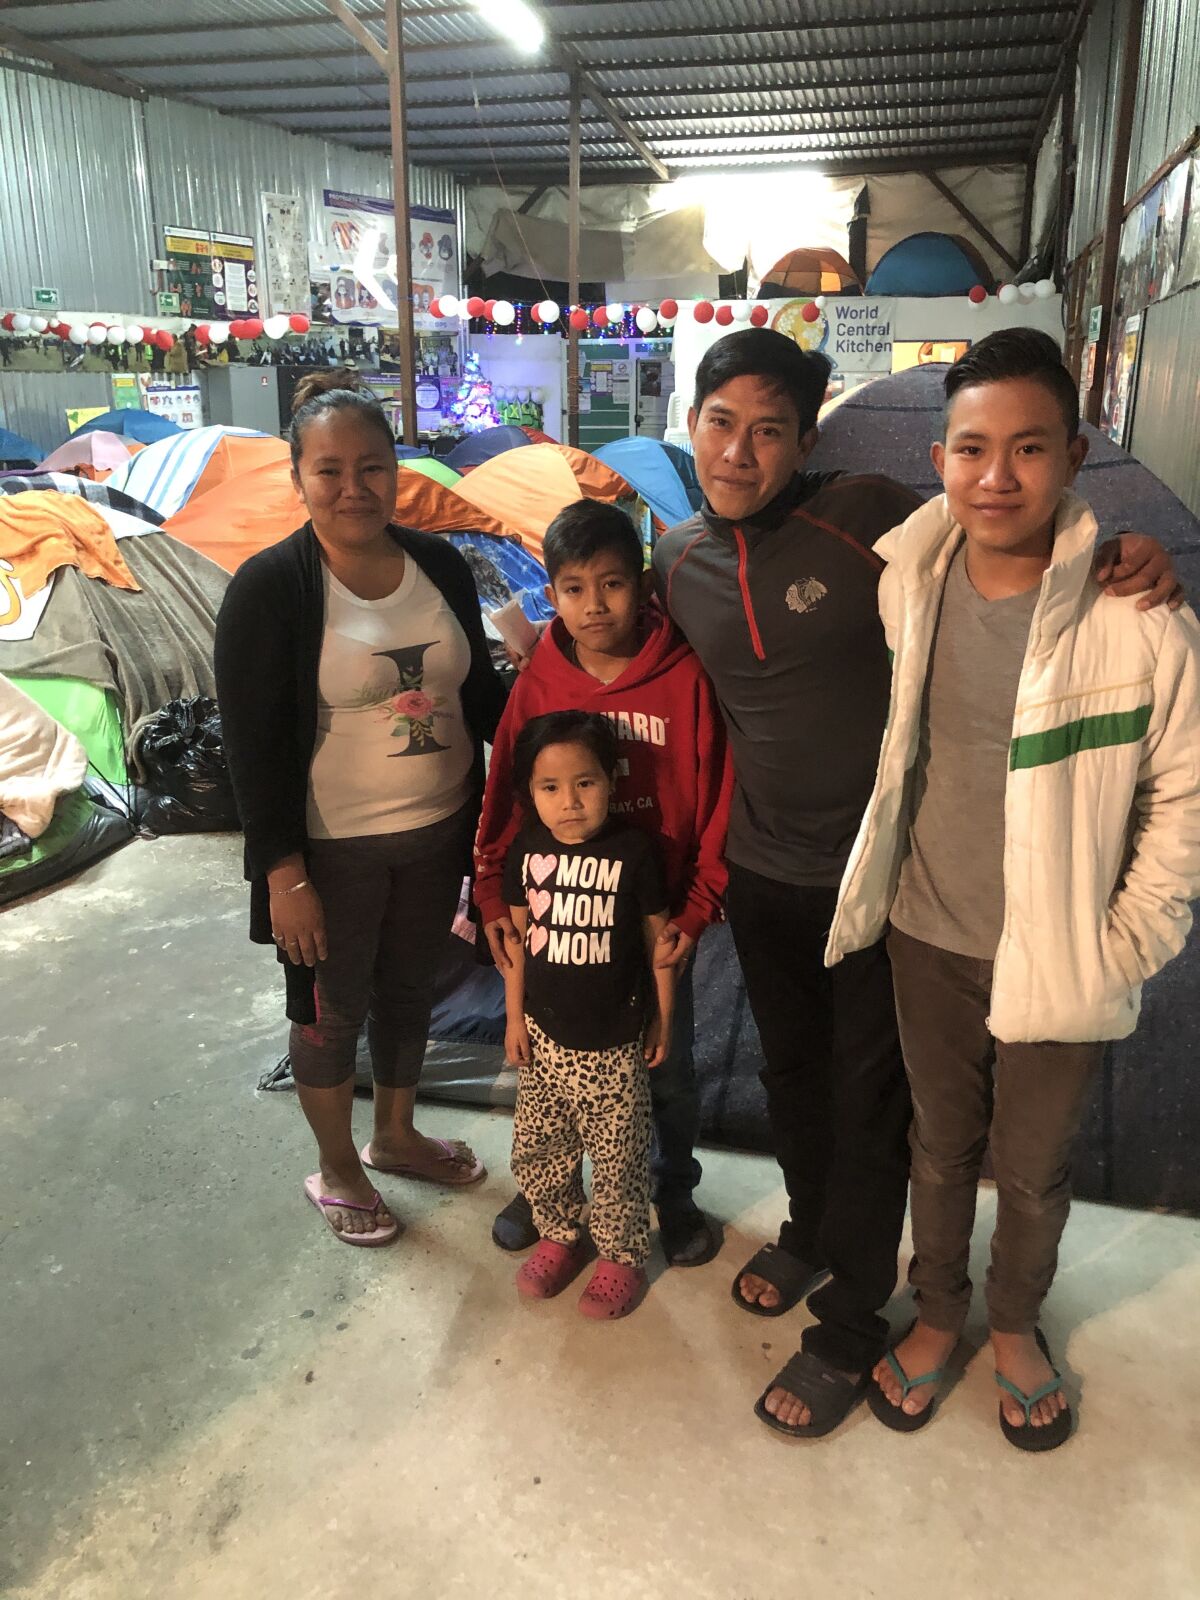 A family poses in front of tents inside a concrete-floored room